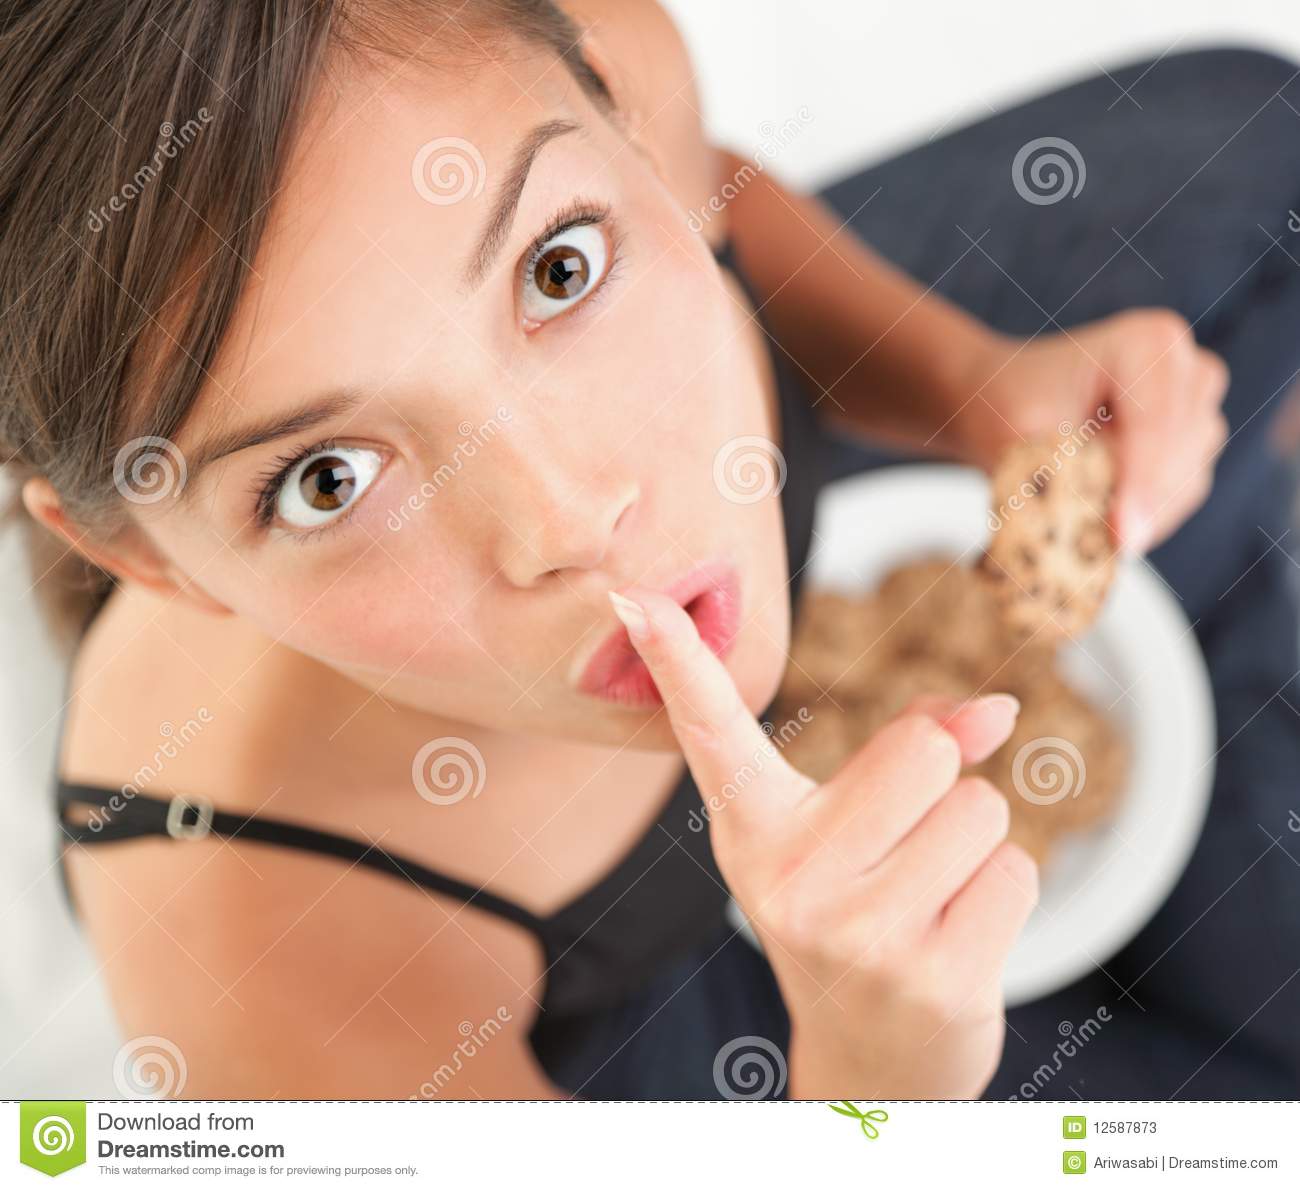 Cookies  Woman Eating Chocolate Chip Cookie  Cute Mixed Race Chinese